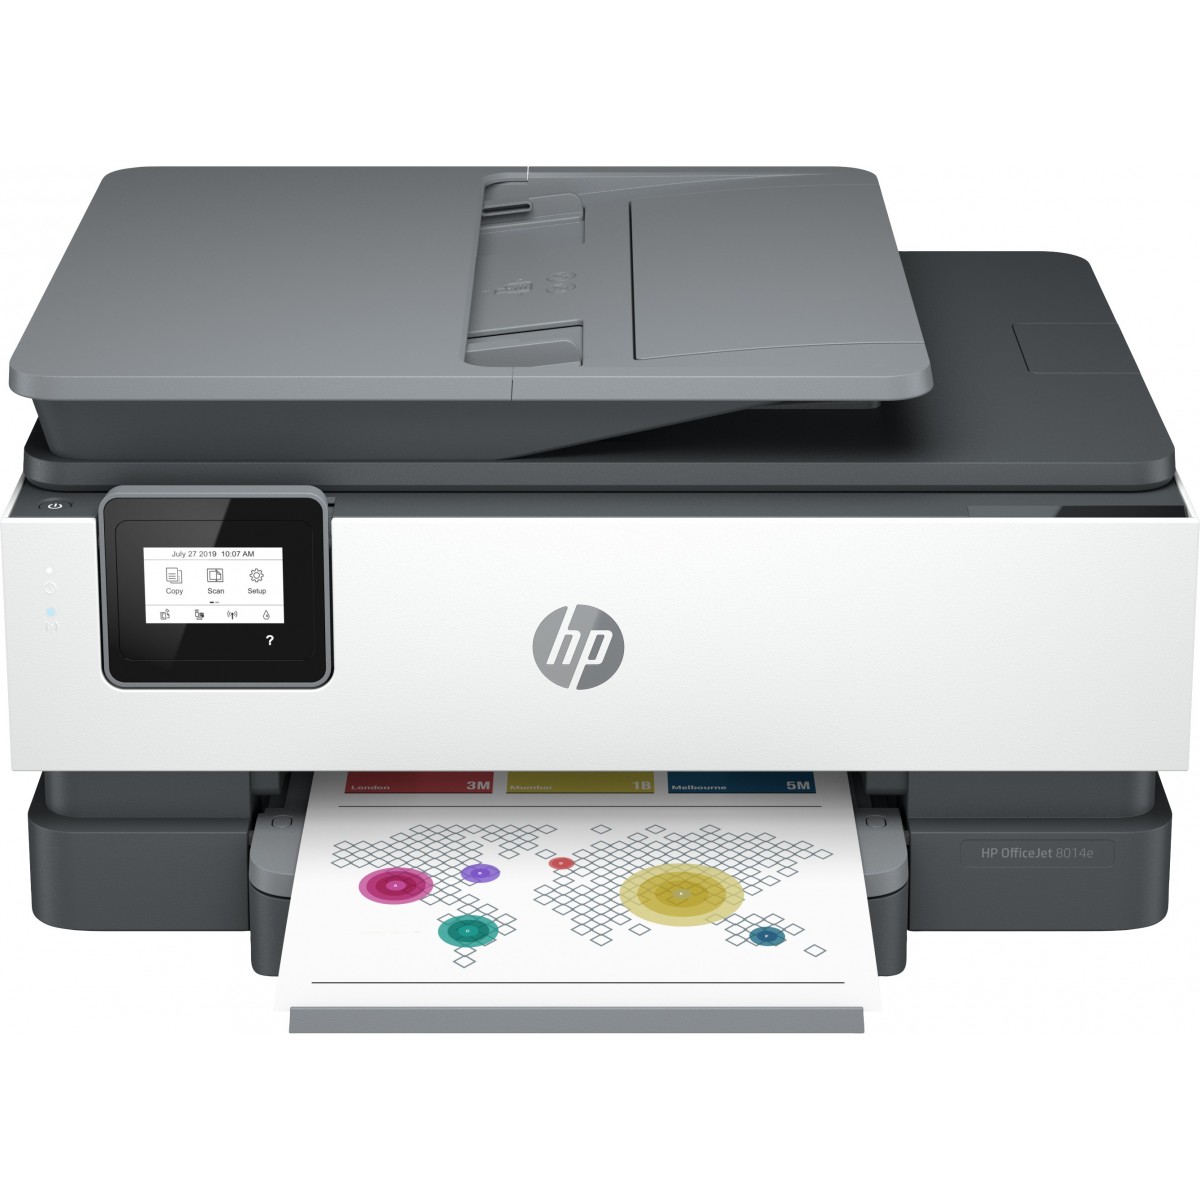 HP OfficeJet 8014e - Thermal inkjet - Colour printing - 4800 x 1200 DPI - A4 - Direct printing - Grey - White